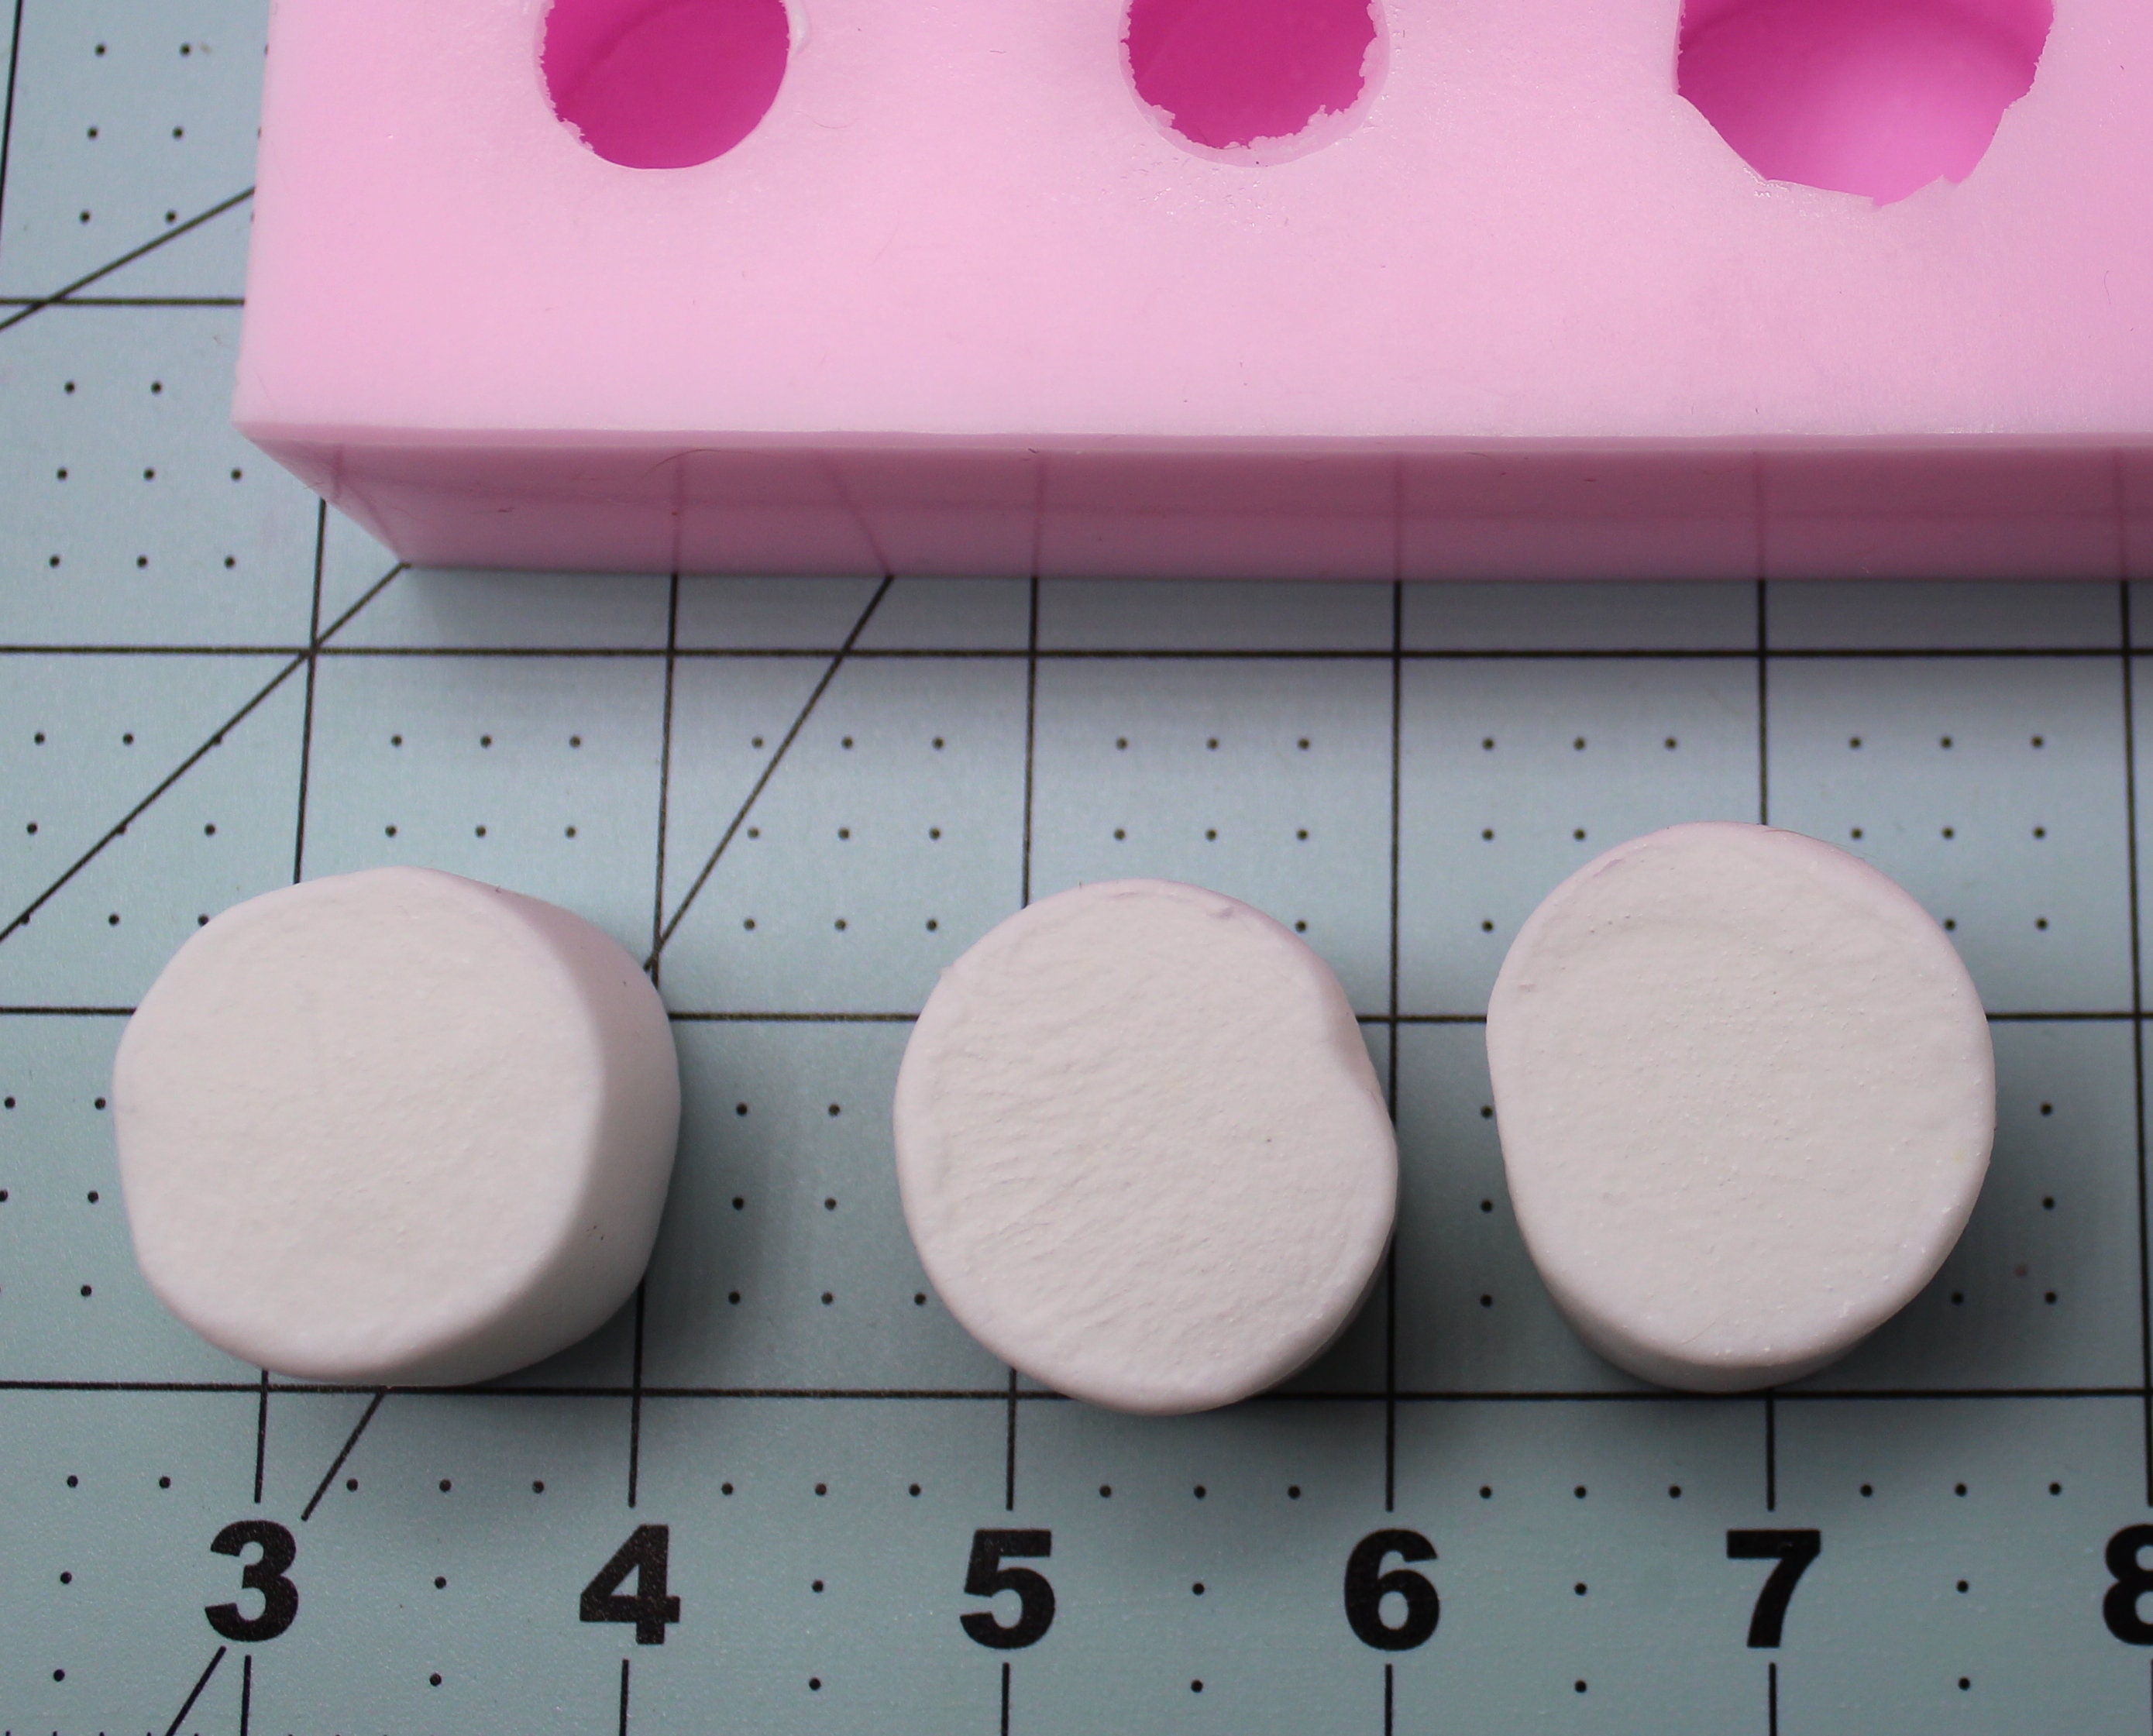 Large Marshmallow Mold. Jet-puffed Marshmallow Silicone Mold for Kraft. 